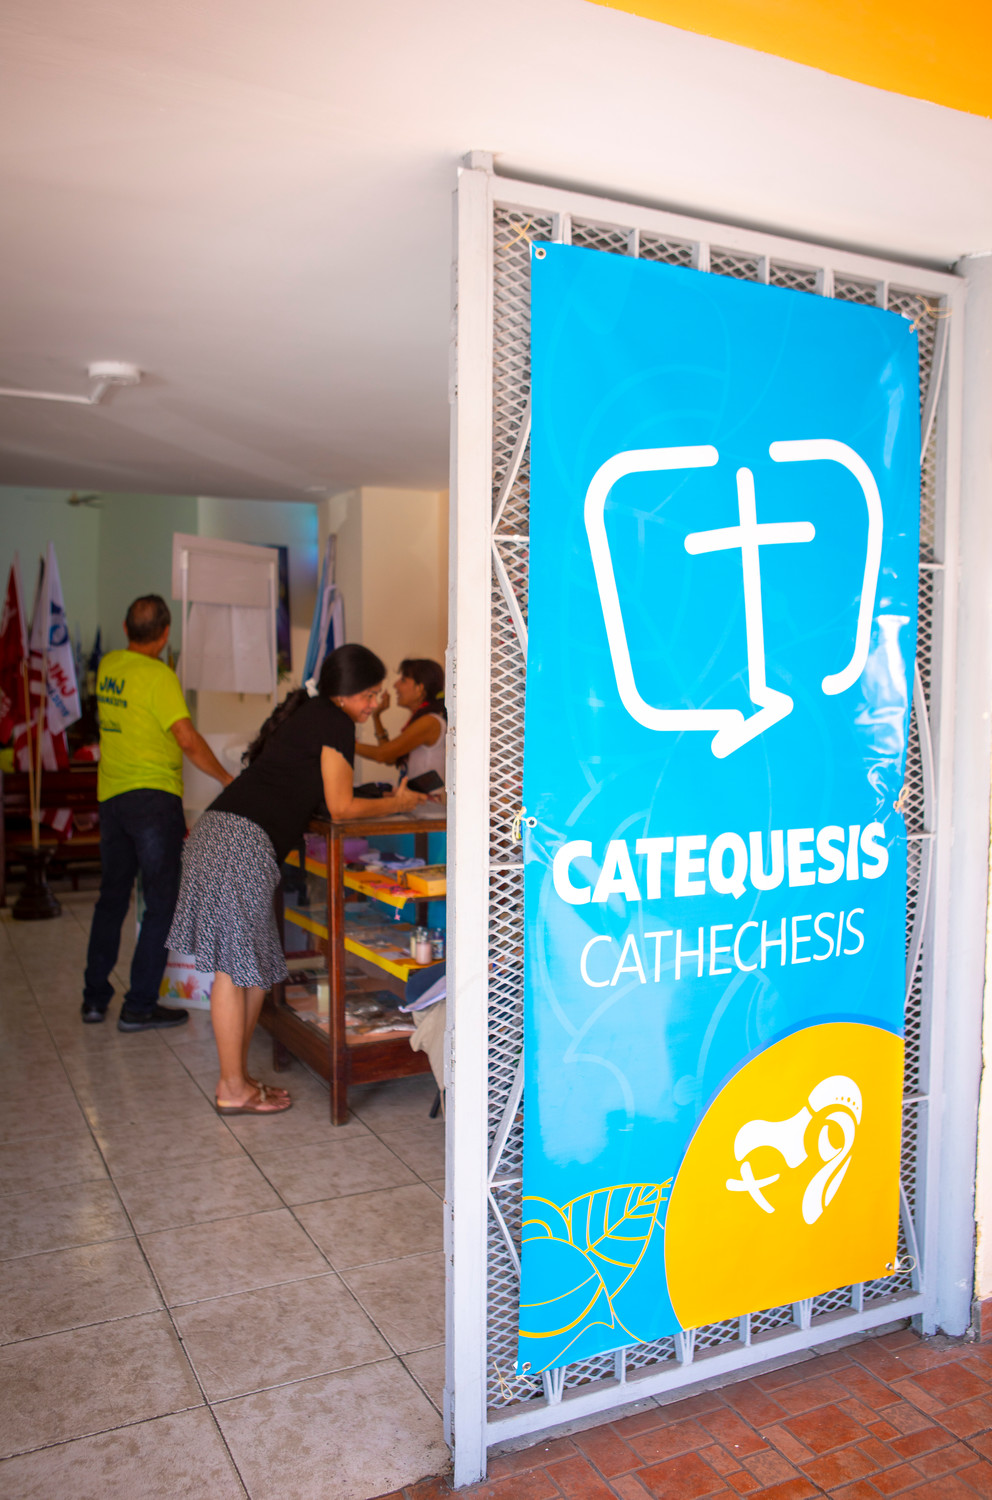 World Youth Day pilgrims assemble at the Parish of Our Mother of Perpetual Help in Panama City Jan. 25, 2019, to attend a catechesis session lead by Chicago Cardinal Blase J. Cupich.